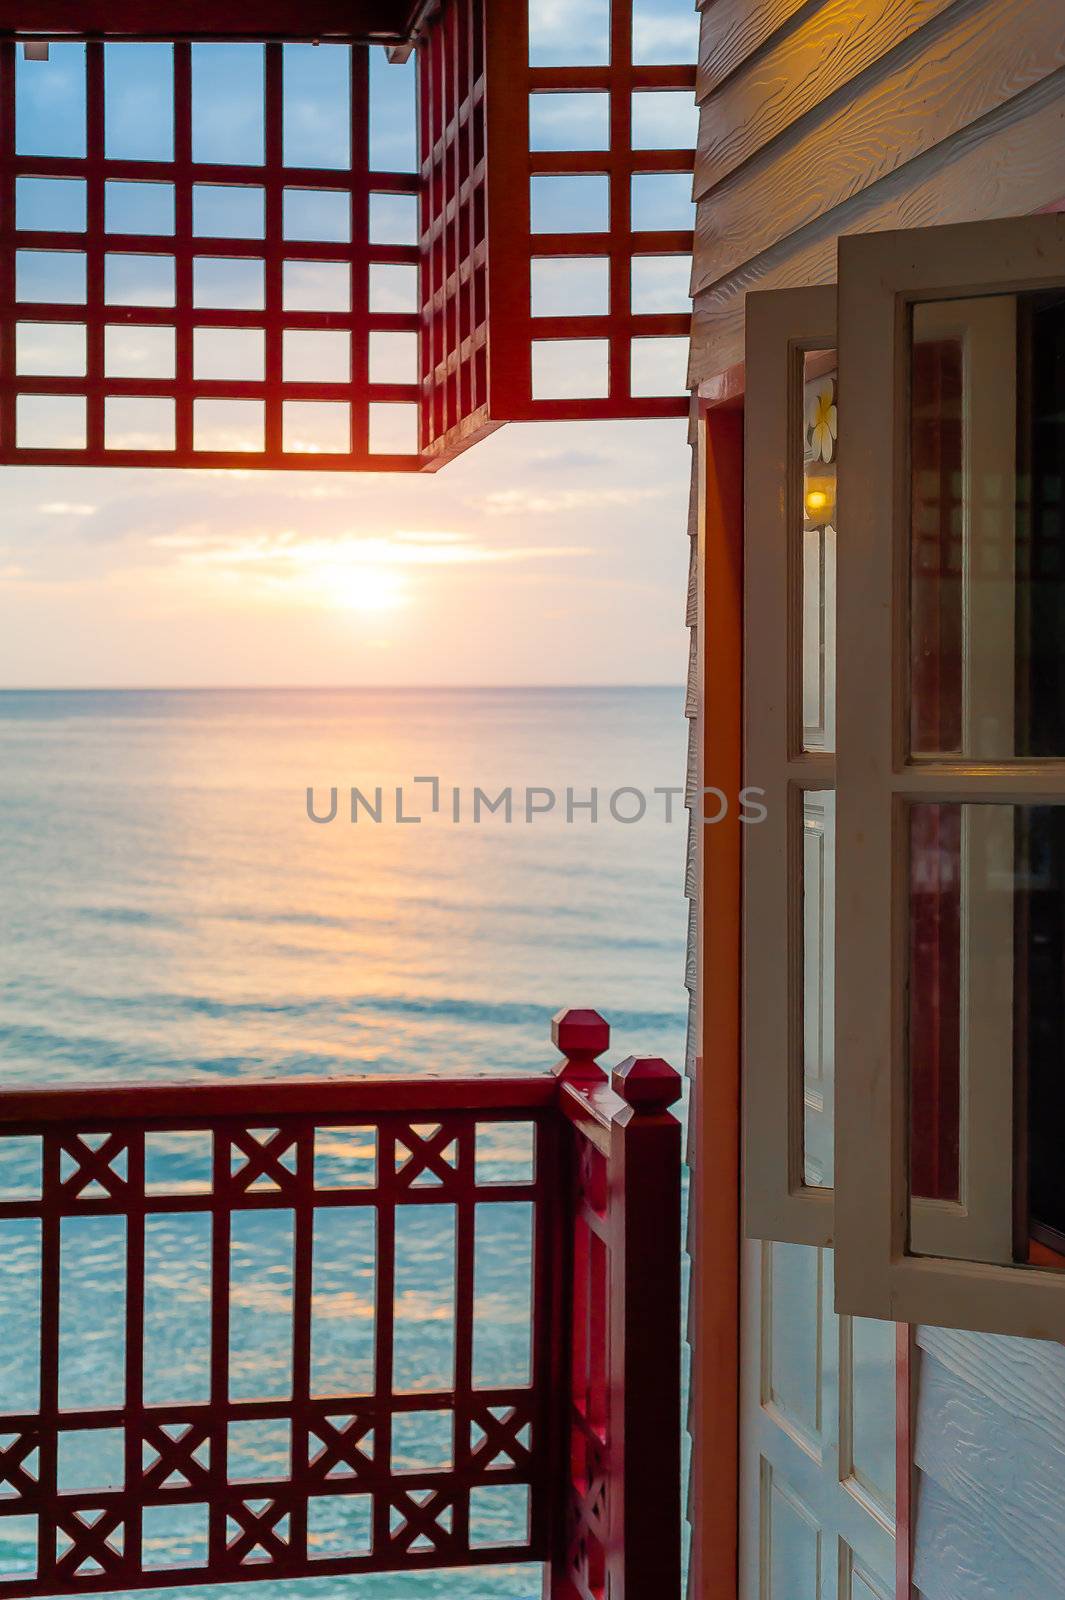 Sunrise in the sea with windows terrace view  by moggara12